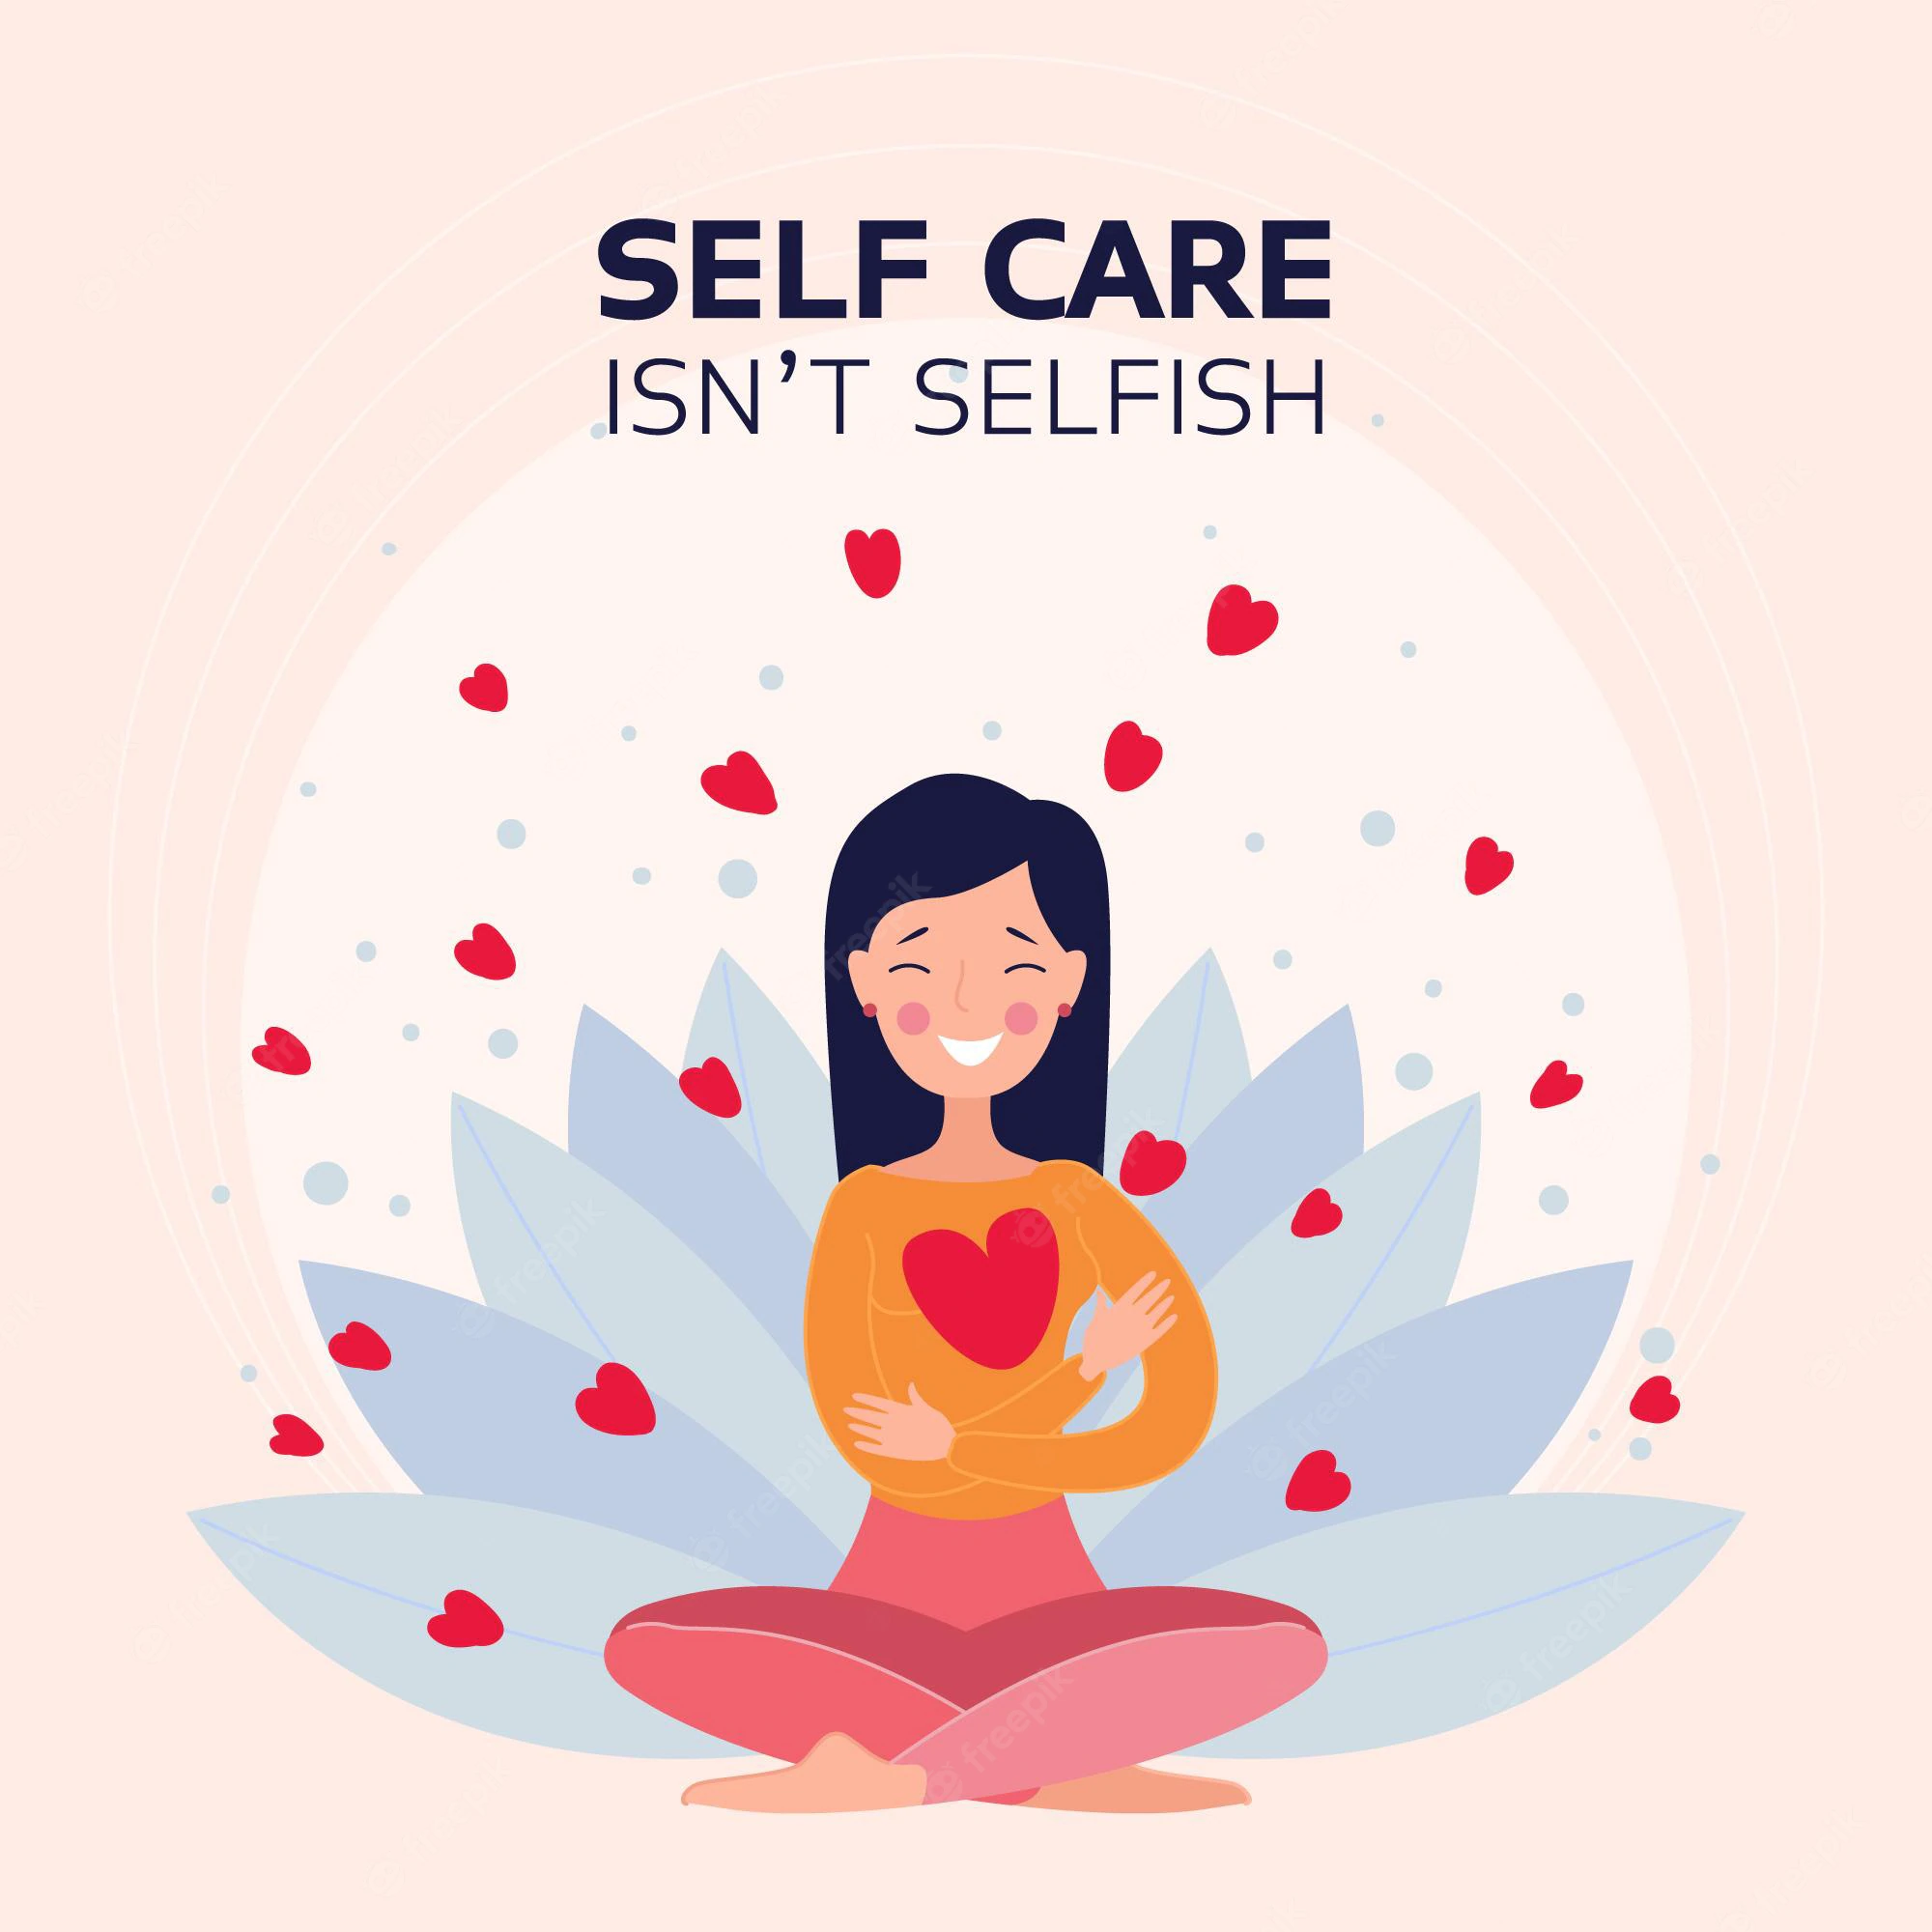 SELF-CARE FOR MENTAL HEALTH